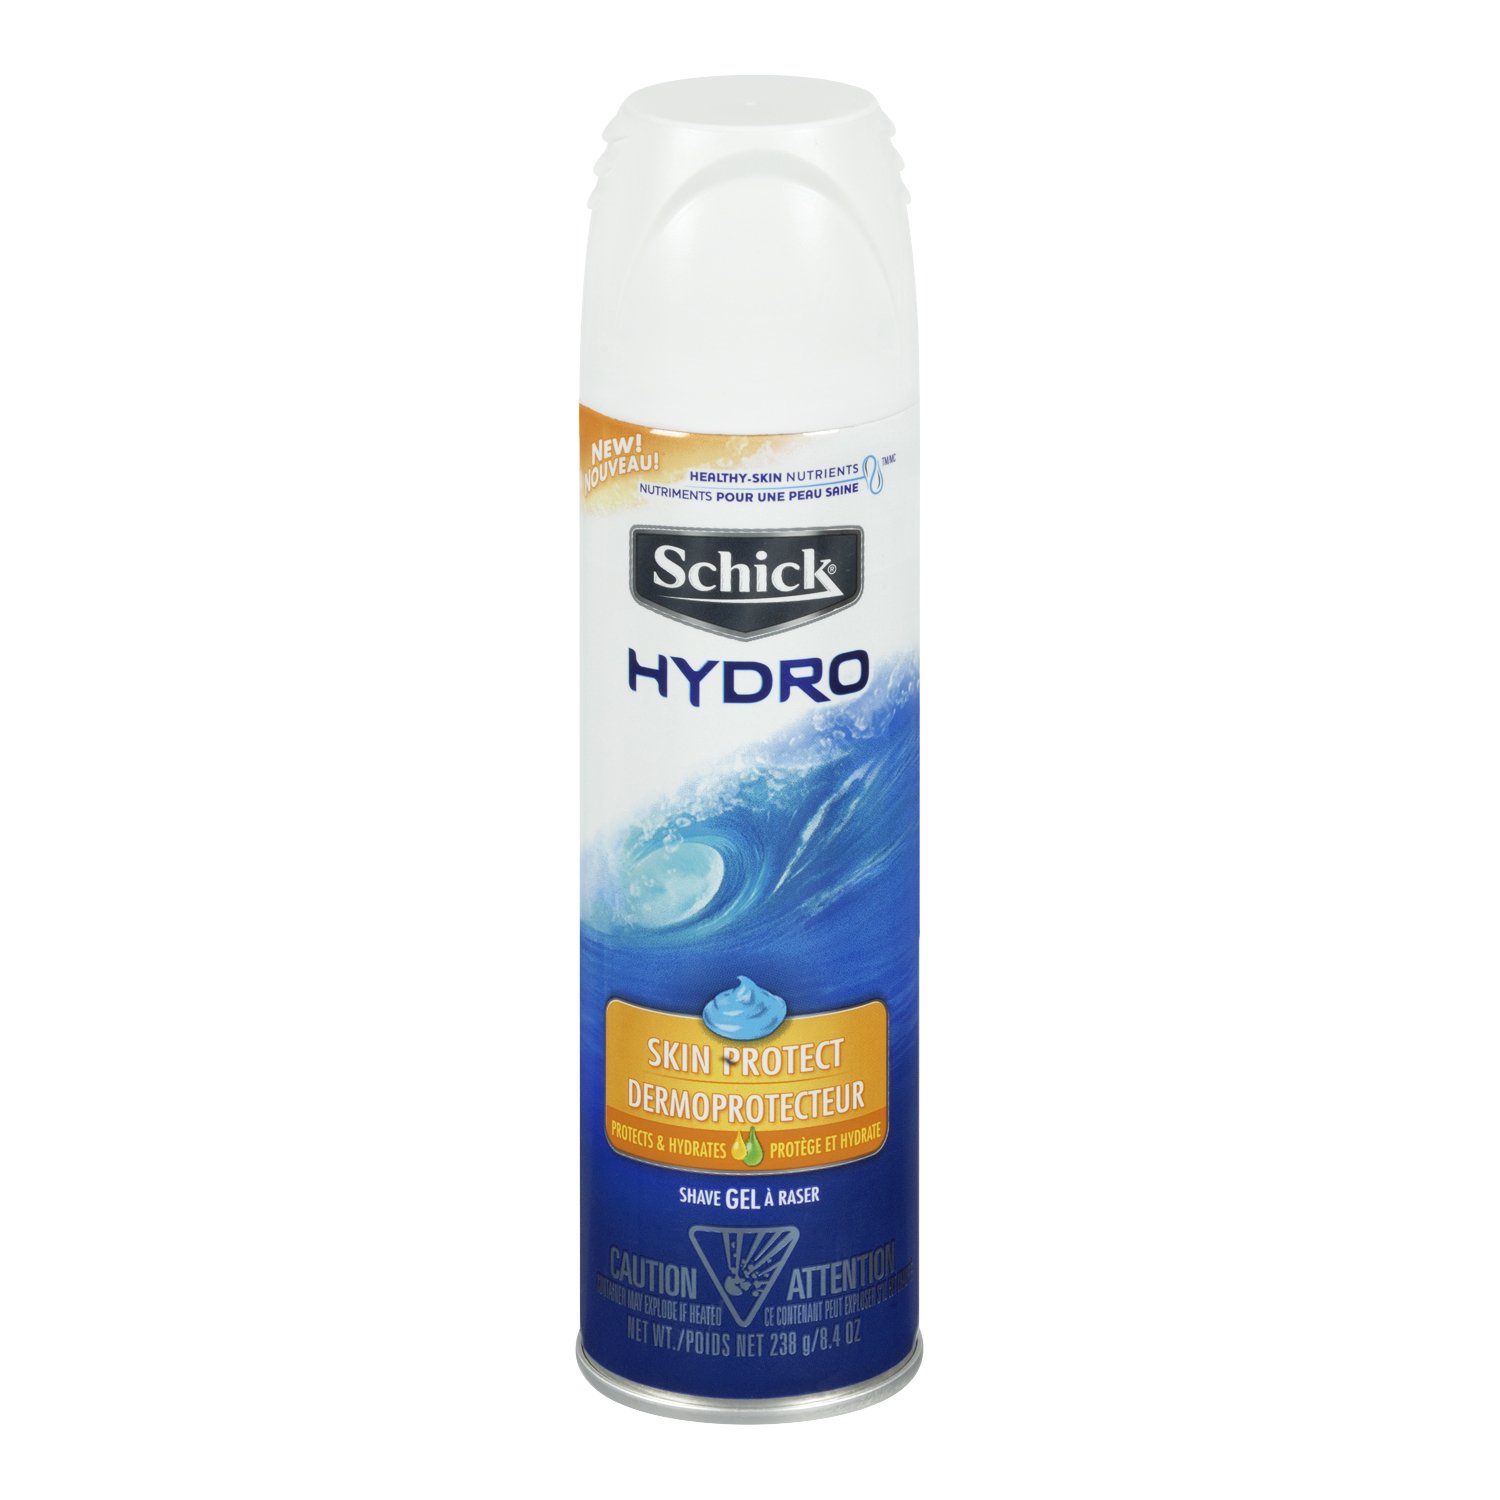 Schick Hydro Skin Protect Shave Gel, 1 count